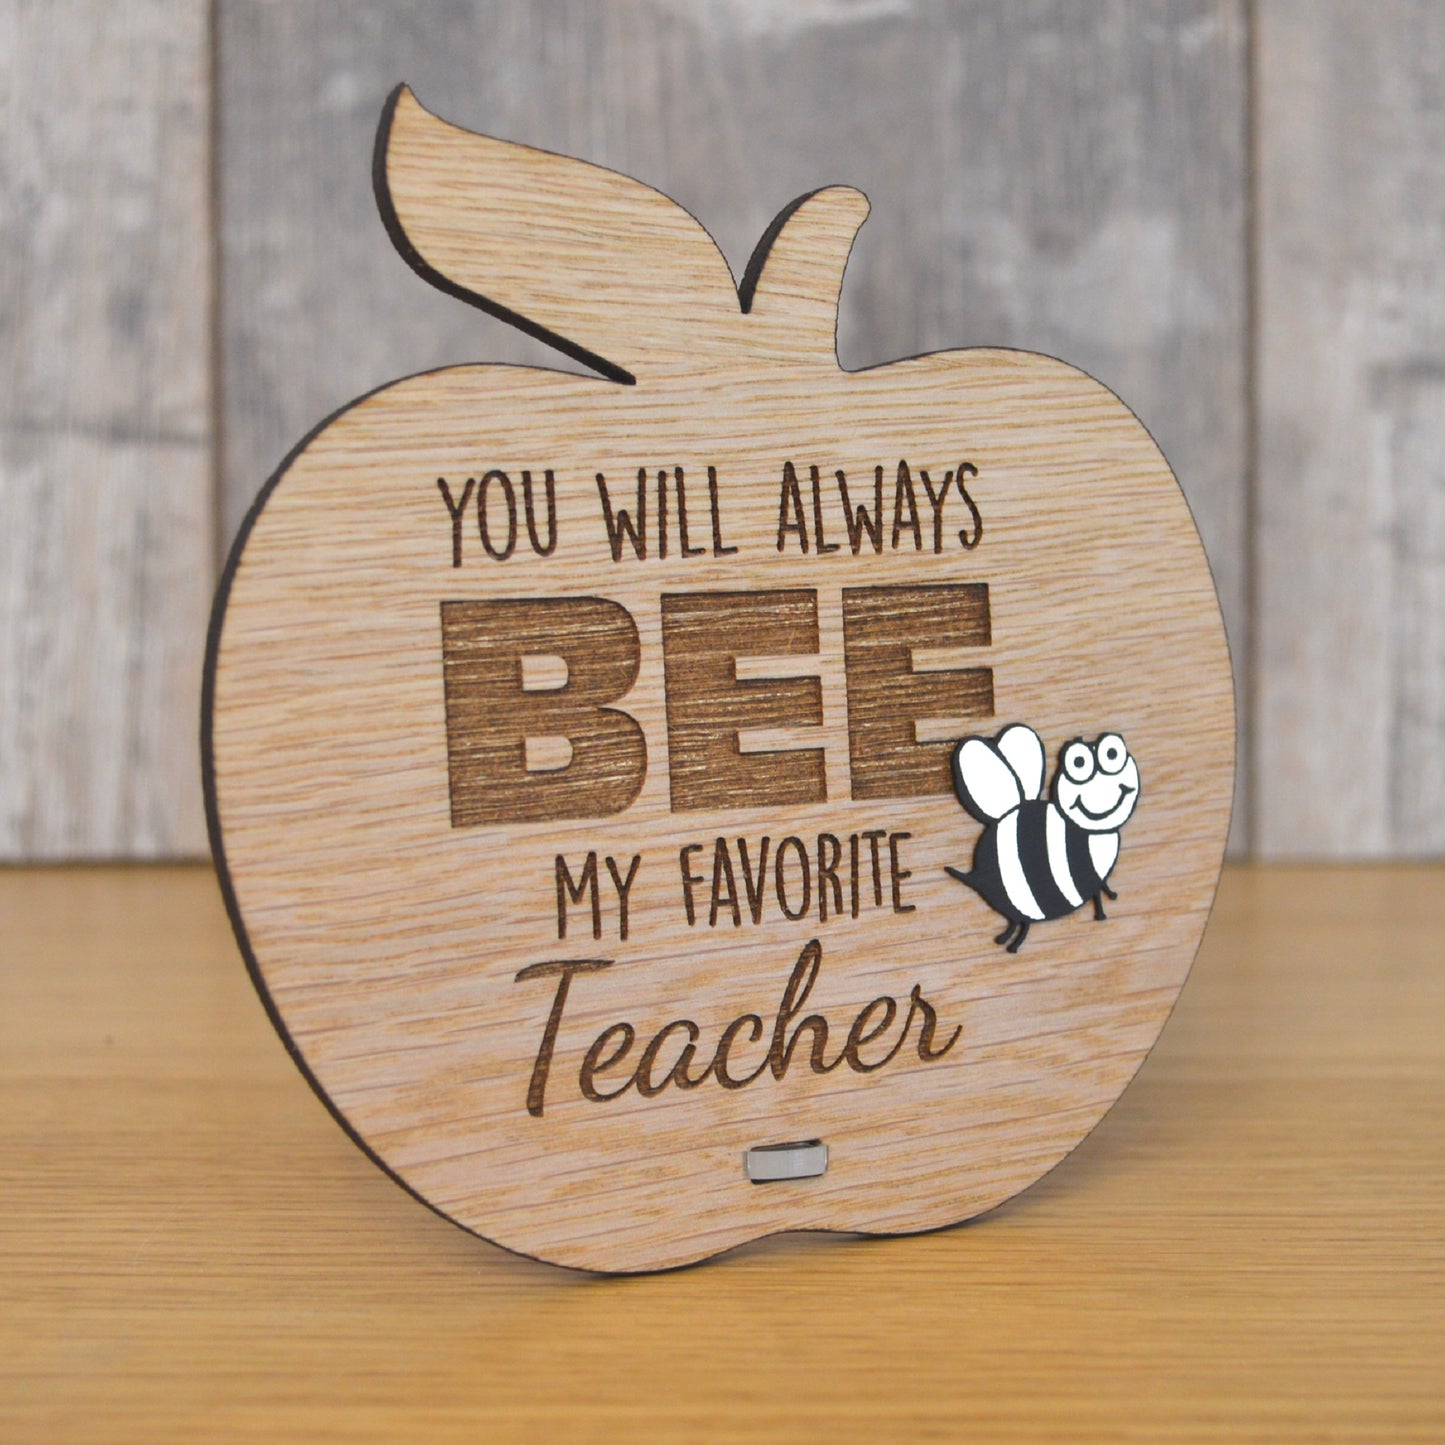 Cute Personalised End Of Term Teacher Gift - You Will Always BEE My Favourite Teacher - Bumble Bee Plaque